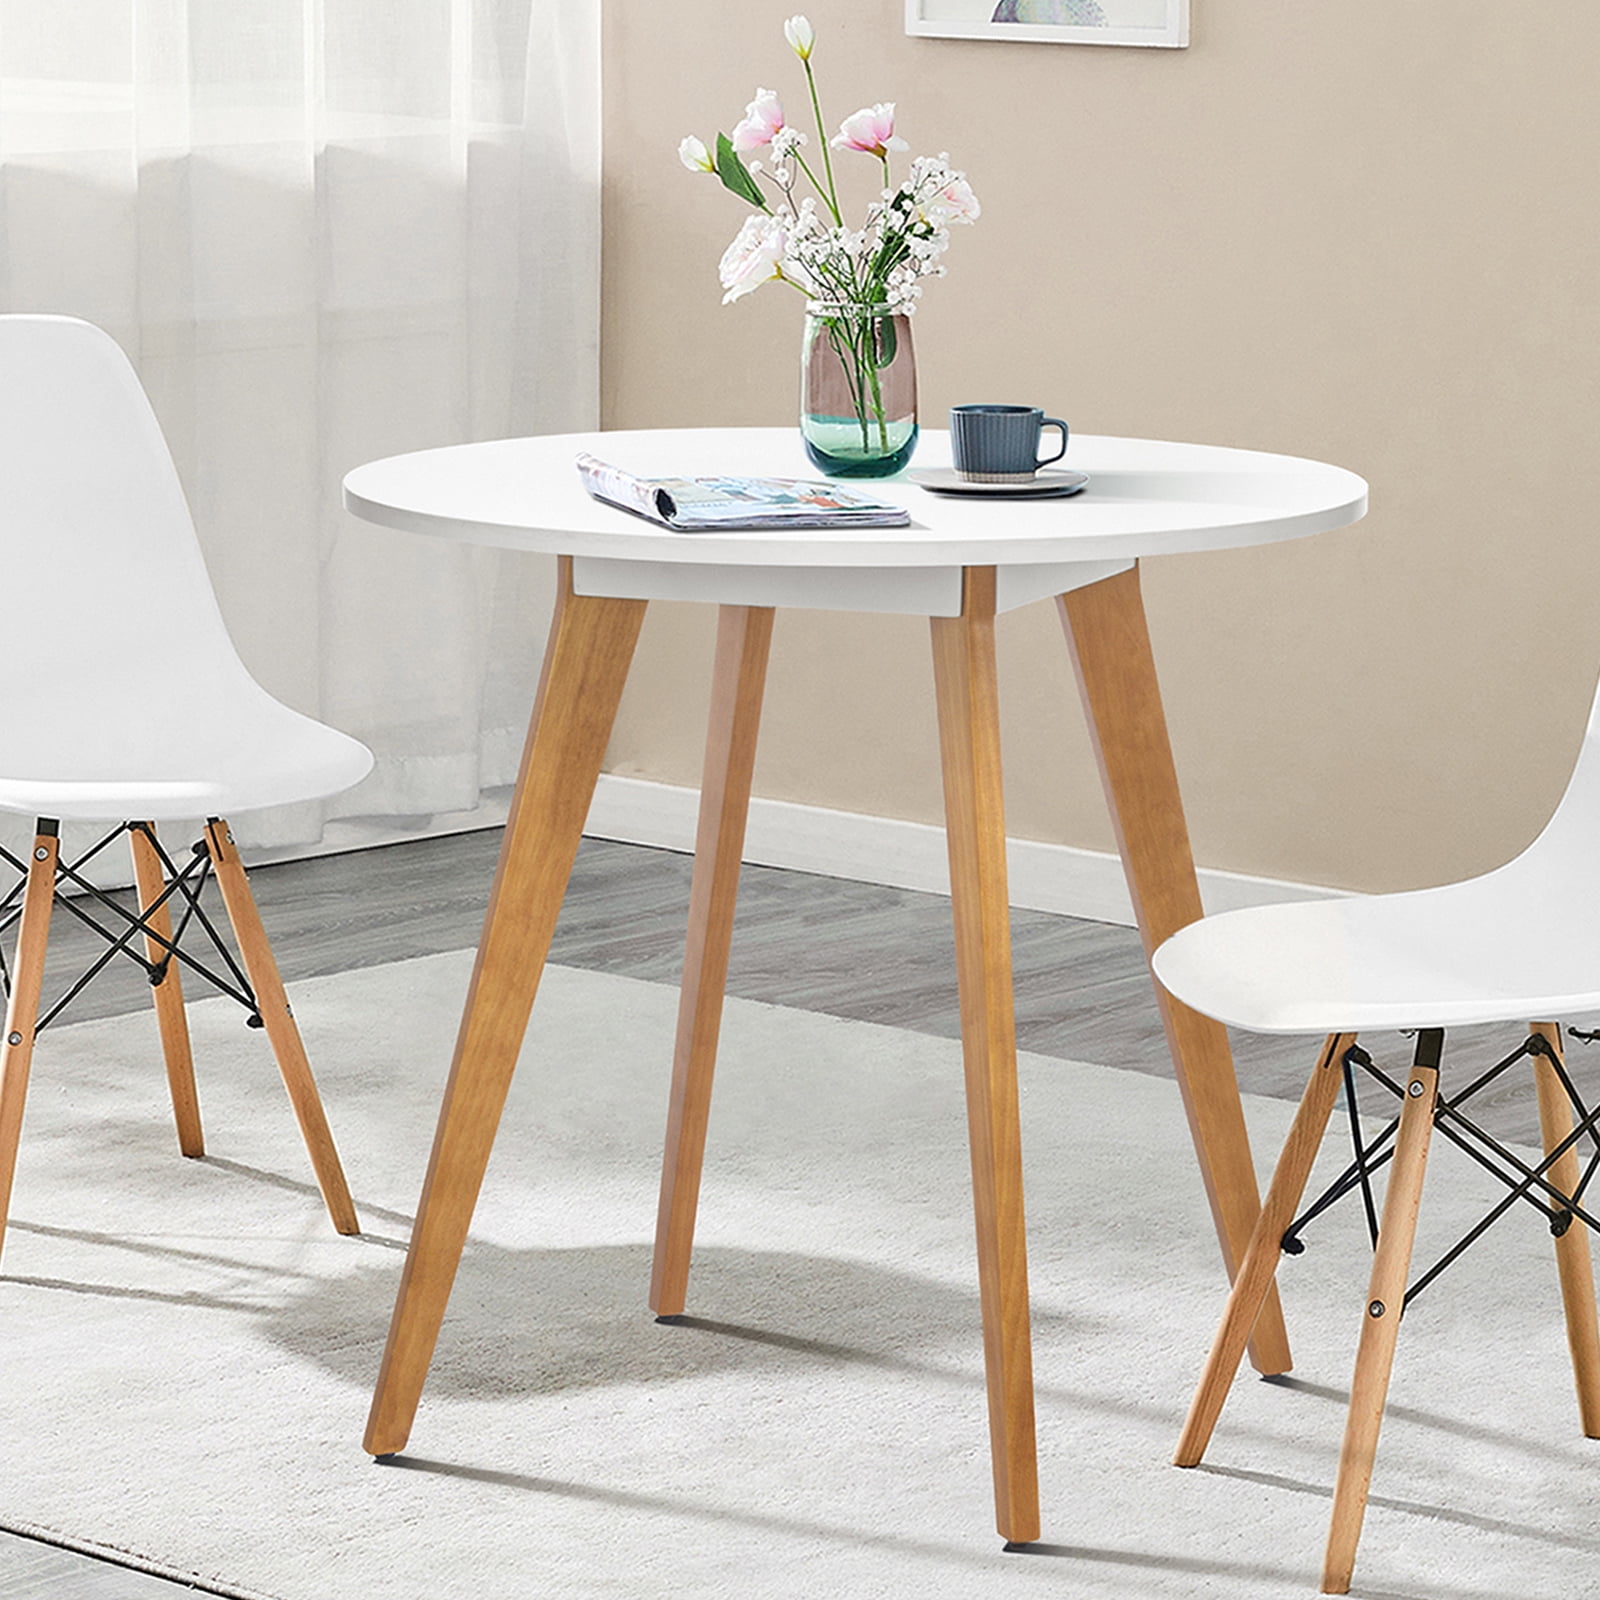 Homy Casa Rookie 31.5 in. White Square Manuefactured Wood Table Top Solid  Beech Wood Legs Dining Table ROOKIE SQUARE TABLE WHITE - The Home Depot